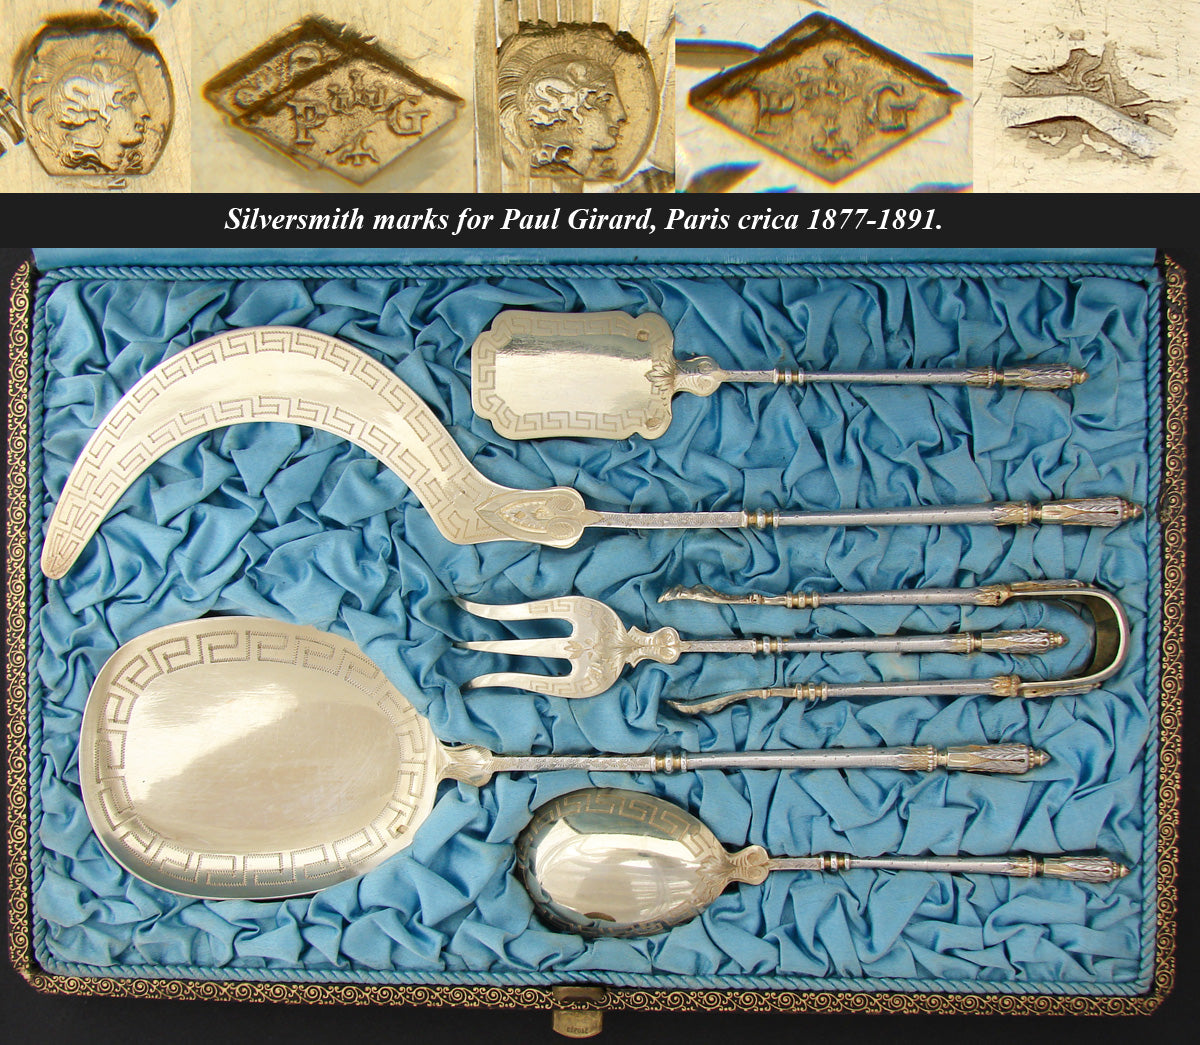 Antique French 18k Gold on .800 (nearly sterling) Silver "Vermeil" 6pc Ice Cream & Hors d'Ouevre Serving Utensil Set, in Box